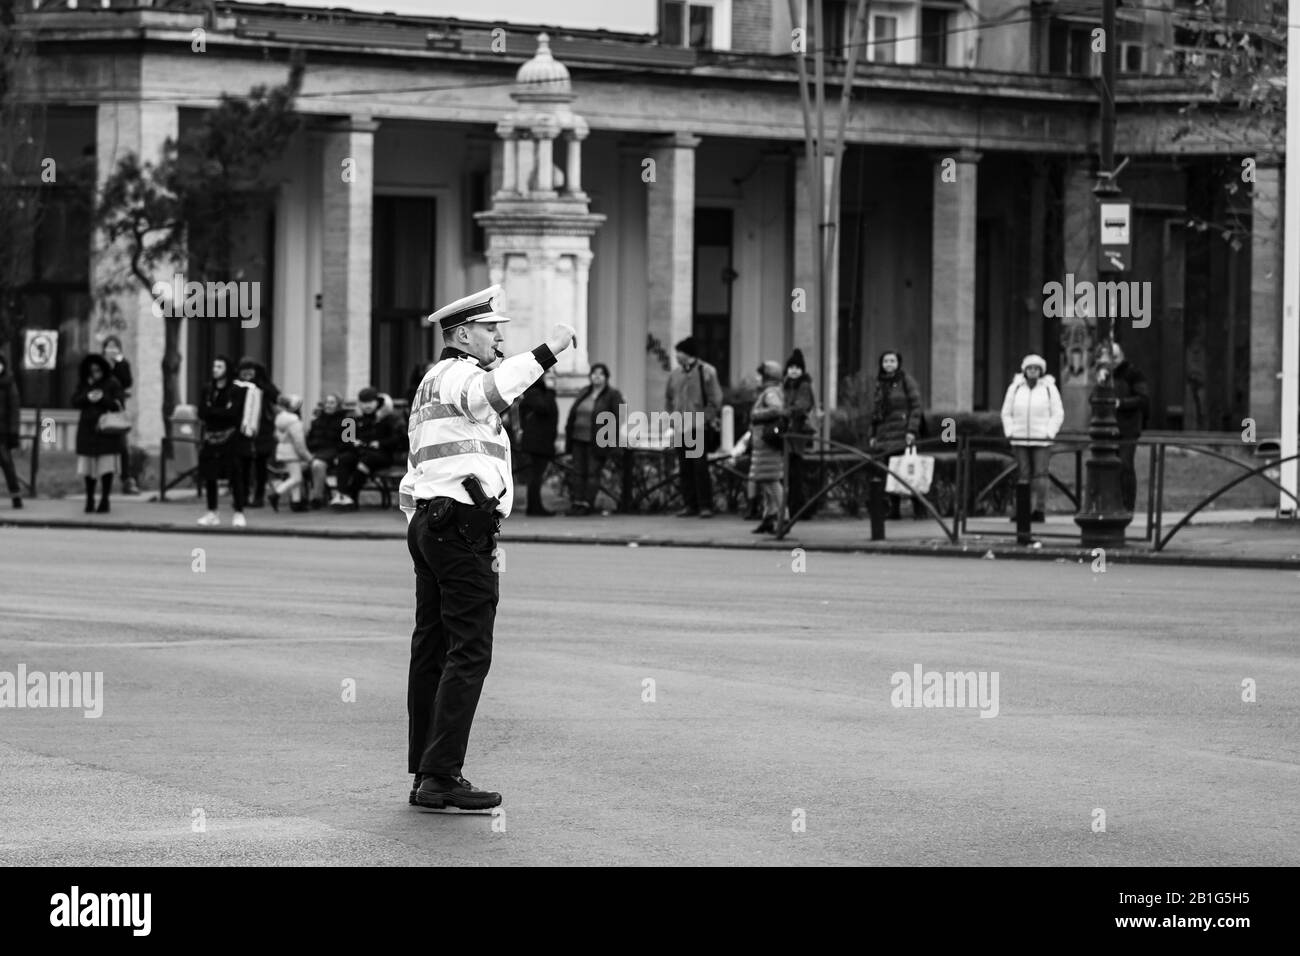 Police agent, Romanian Traffic Police (Politia Rutiera) directing traffic during the morning rush hour in downtown Bucharest, Romania, 2020 Stock Photo